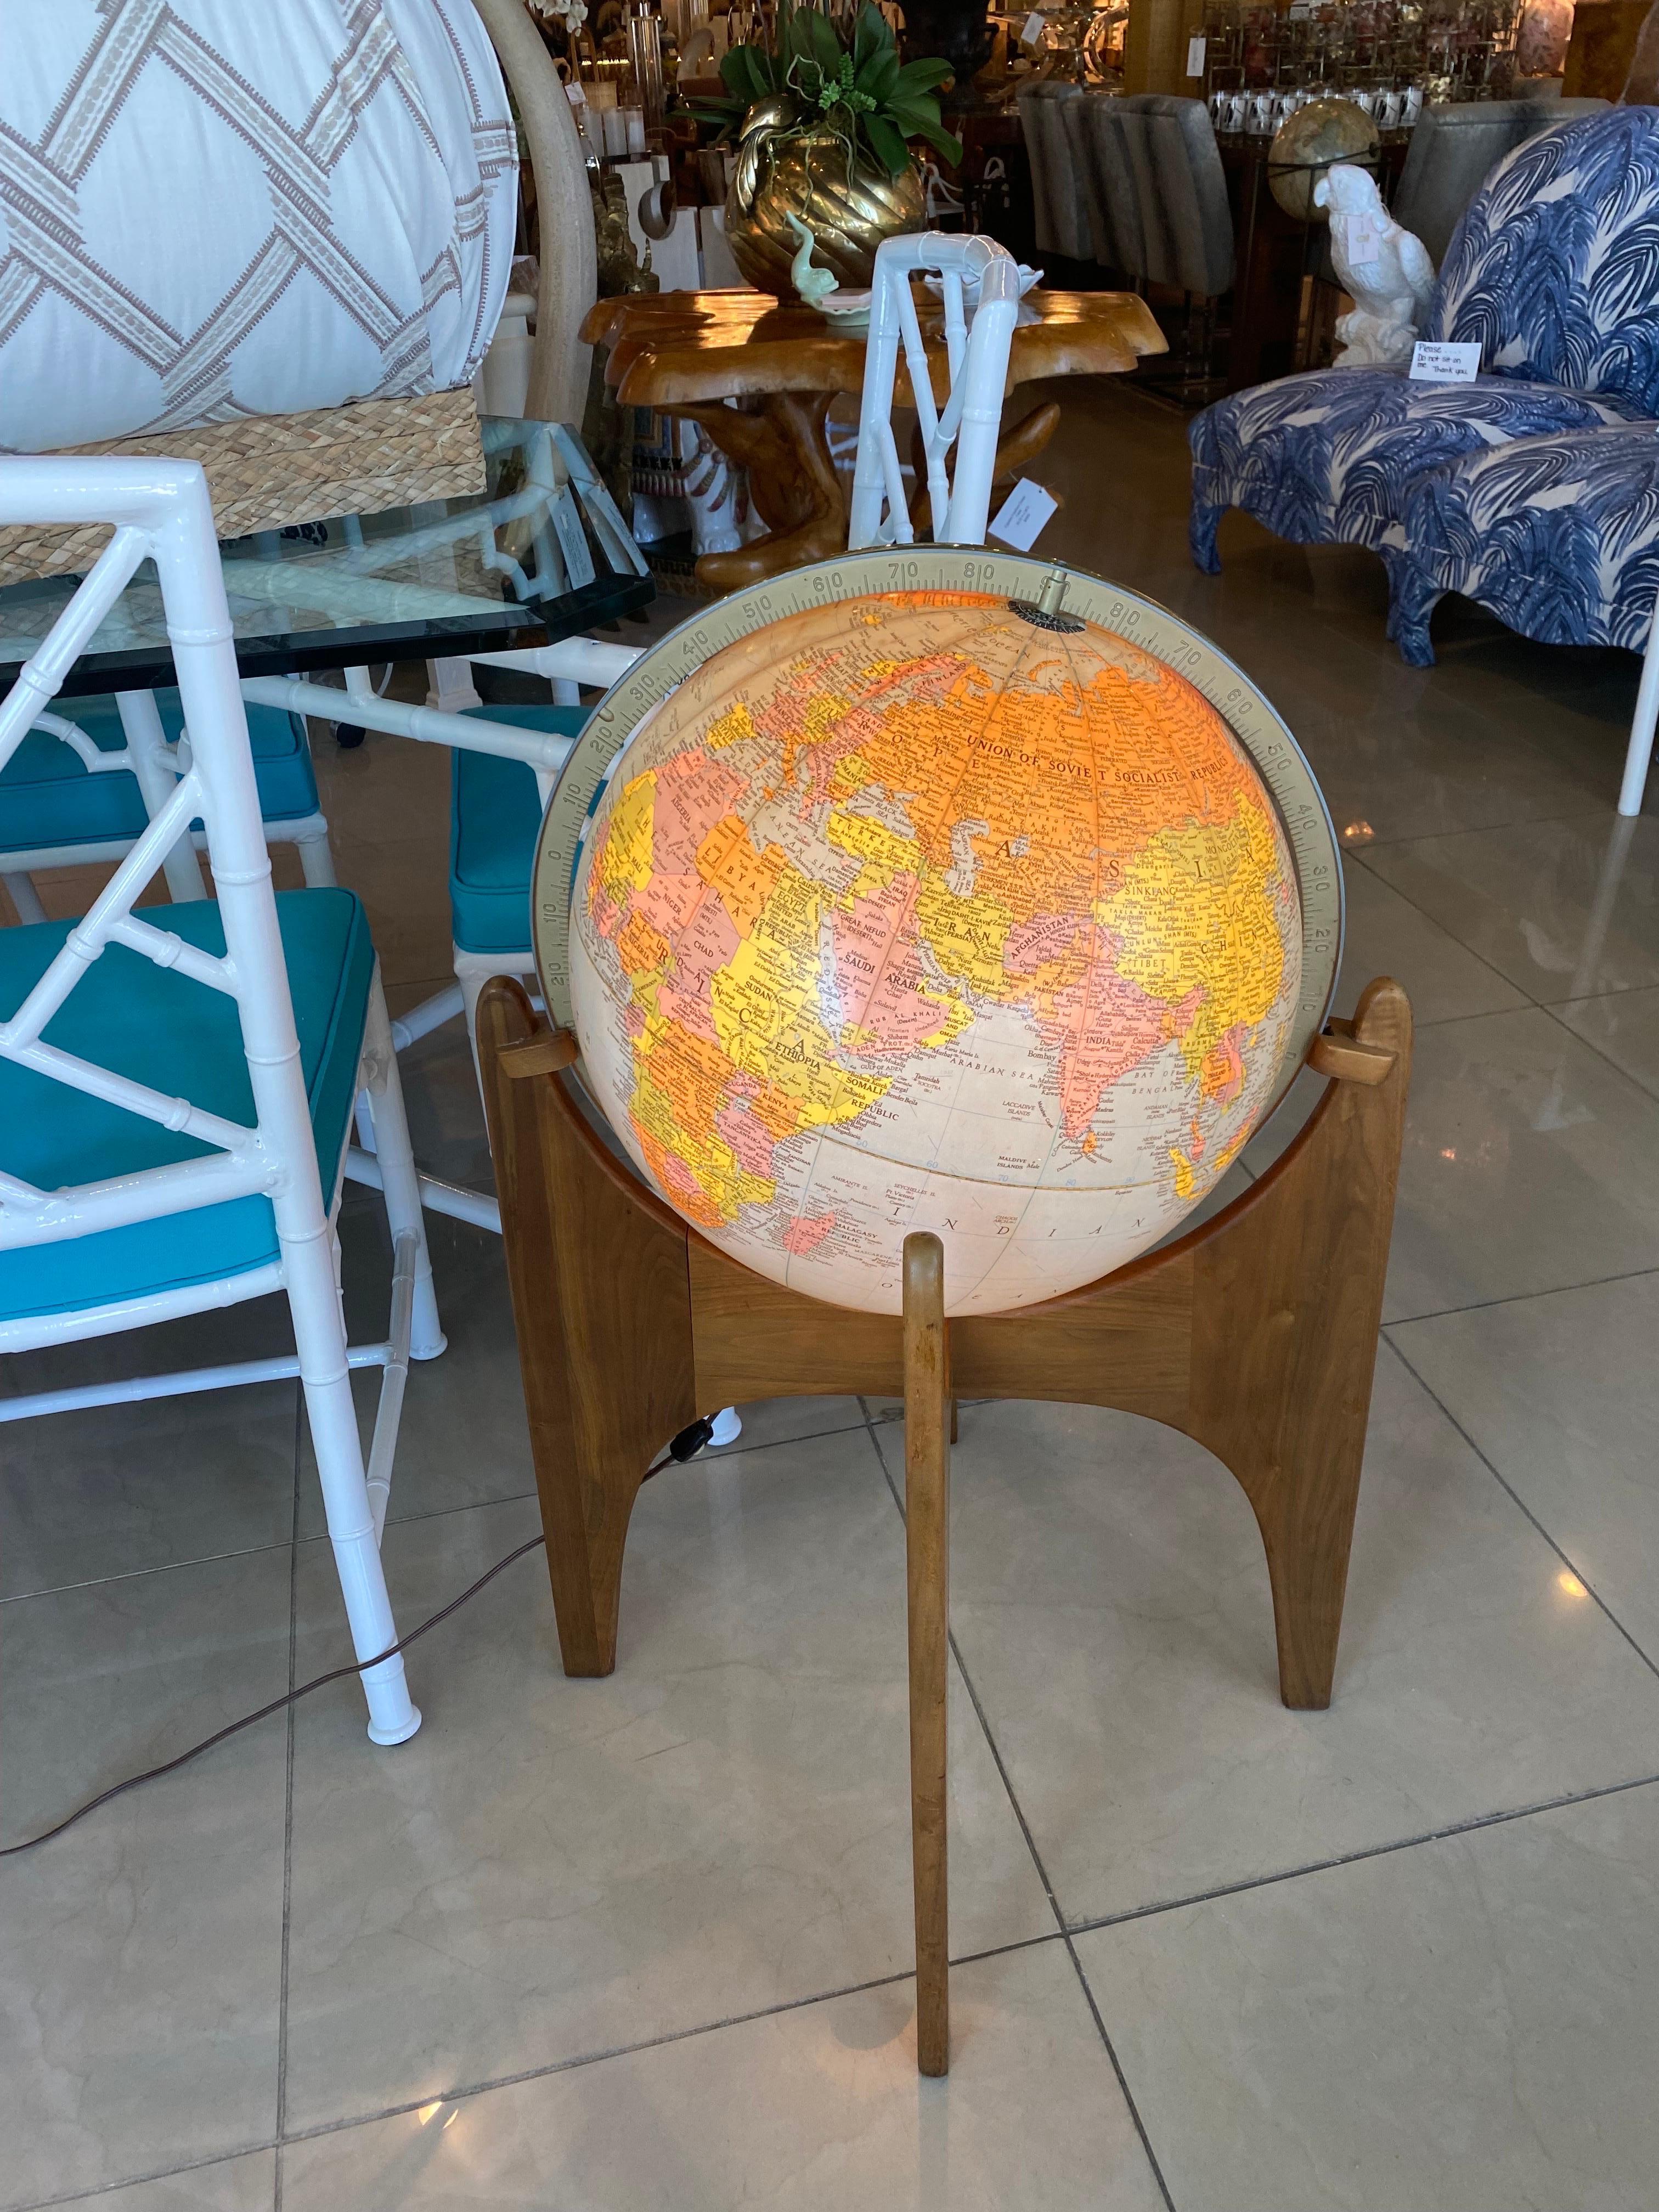 Vintage 1960s Mid-Century Modern illuminated globe by Adrian Pearsall for Craft Associates. Same aging to globe (pictured). Tested, working order. Dimensions: 33 H x 22 W x 22 D.